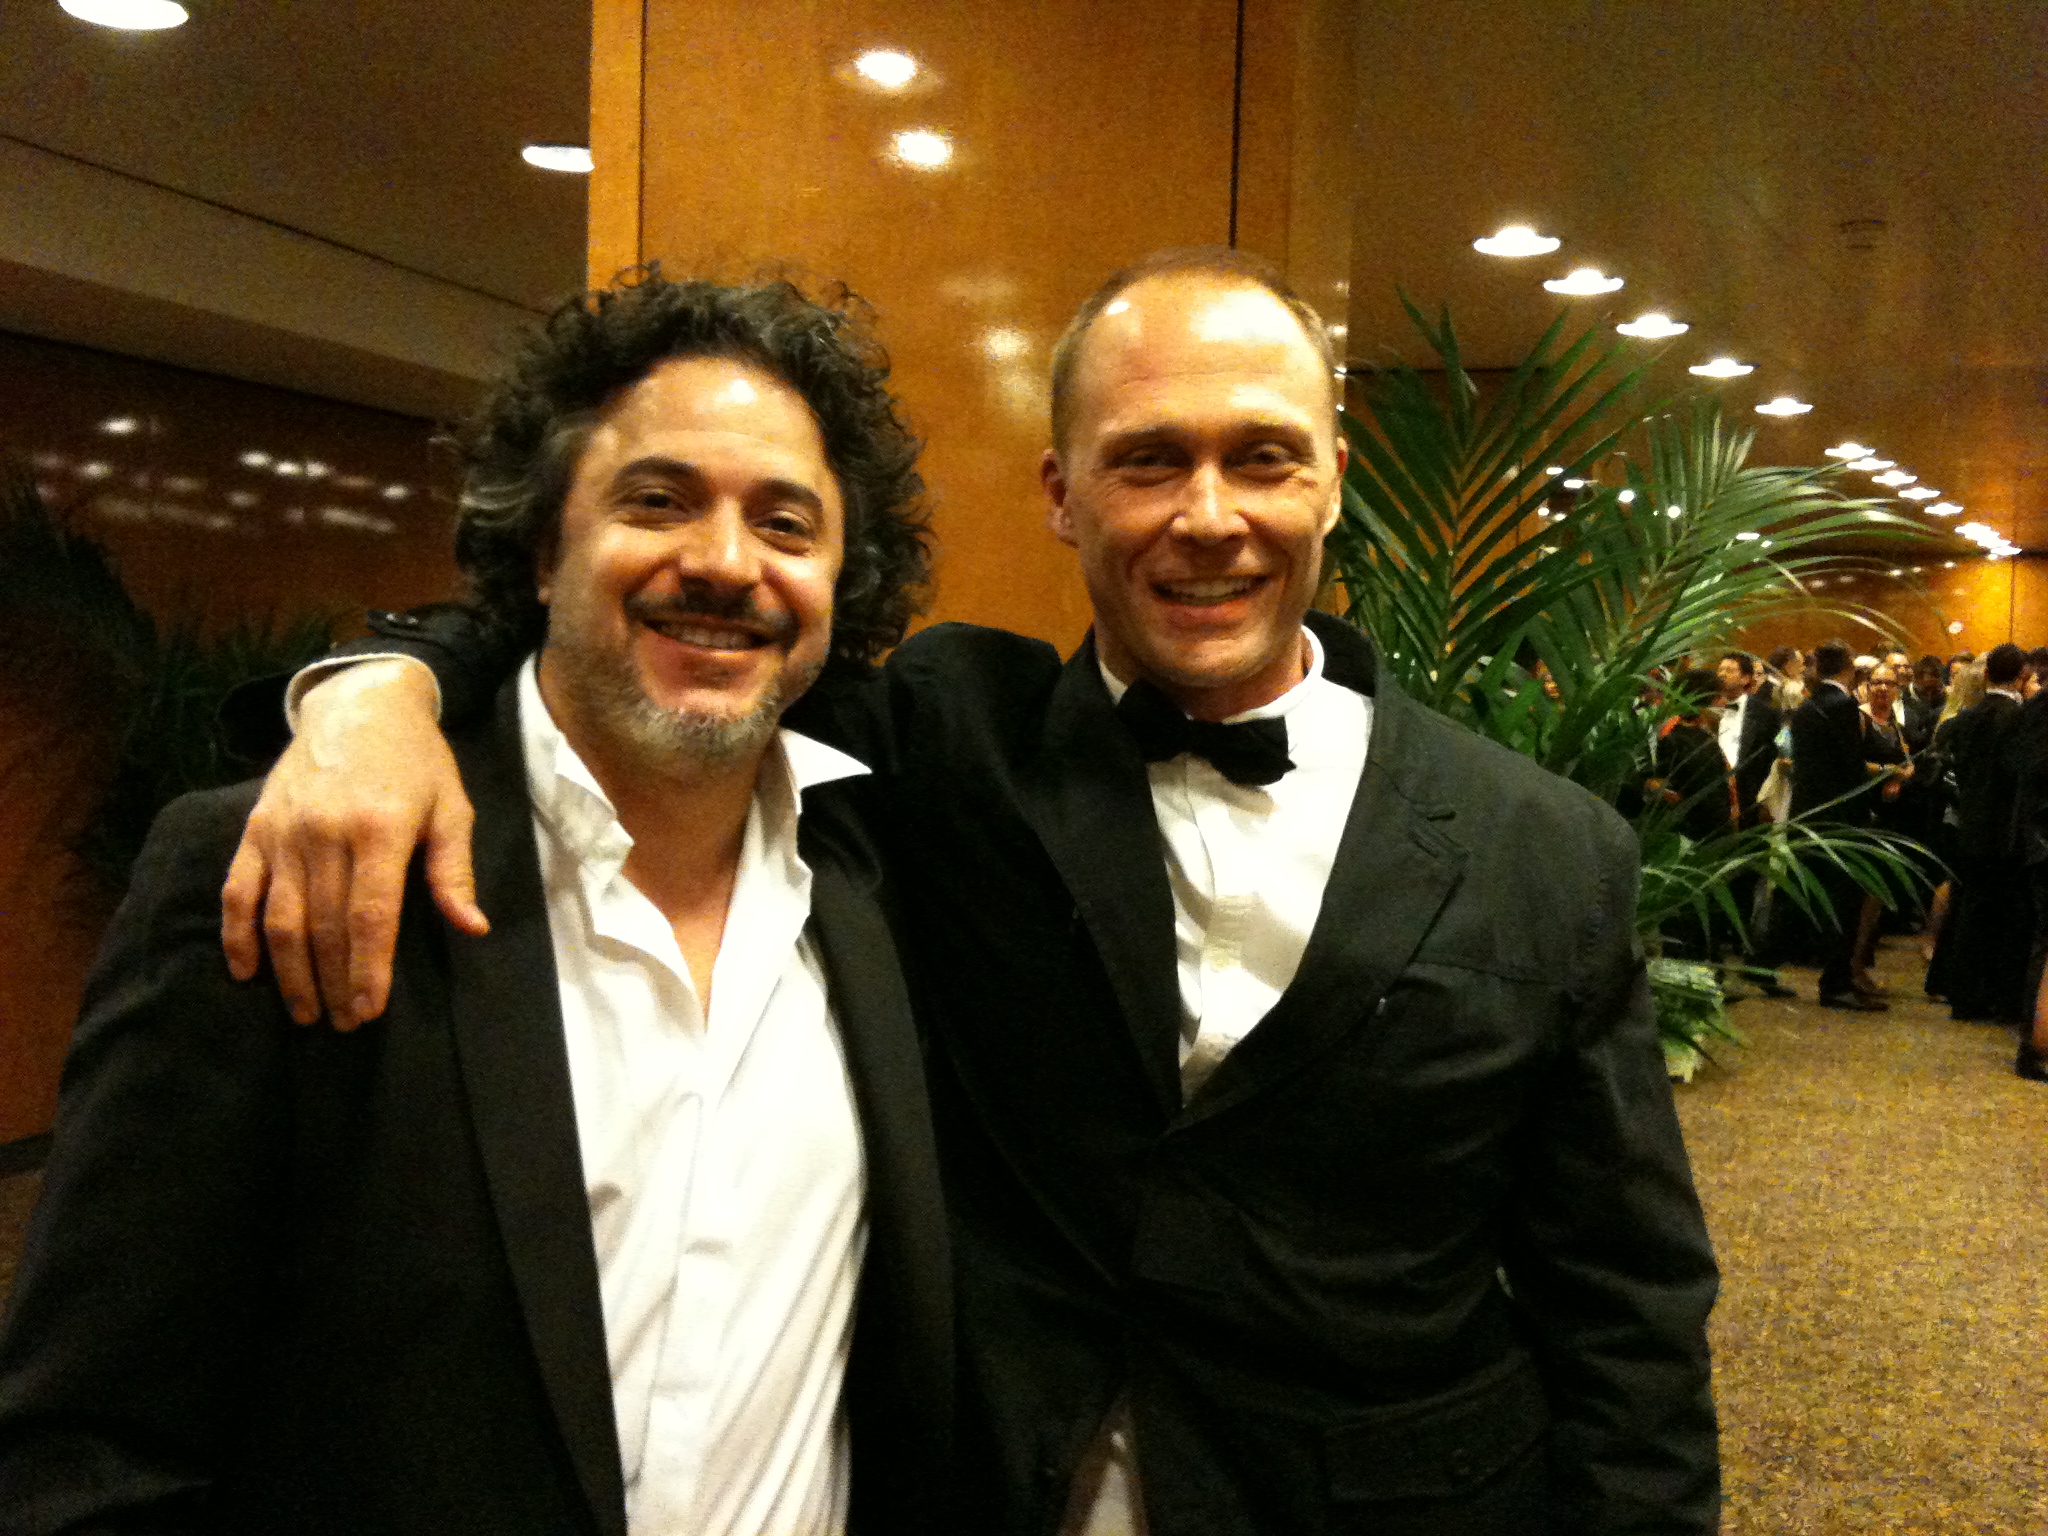 French director, Yoel Dahan (left) and Jim Houck (right) at the premiere of Oliver Stone's 